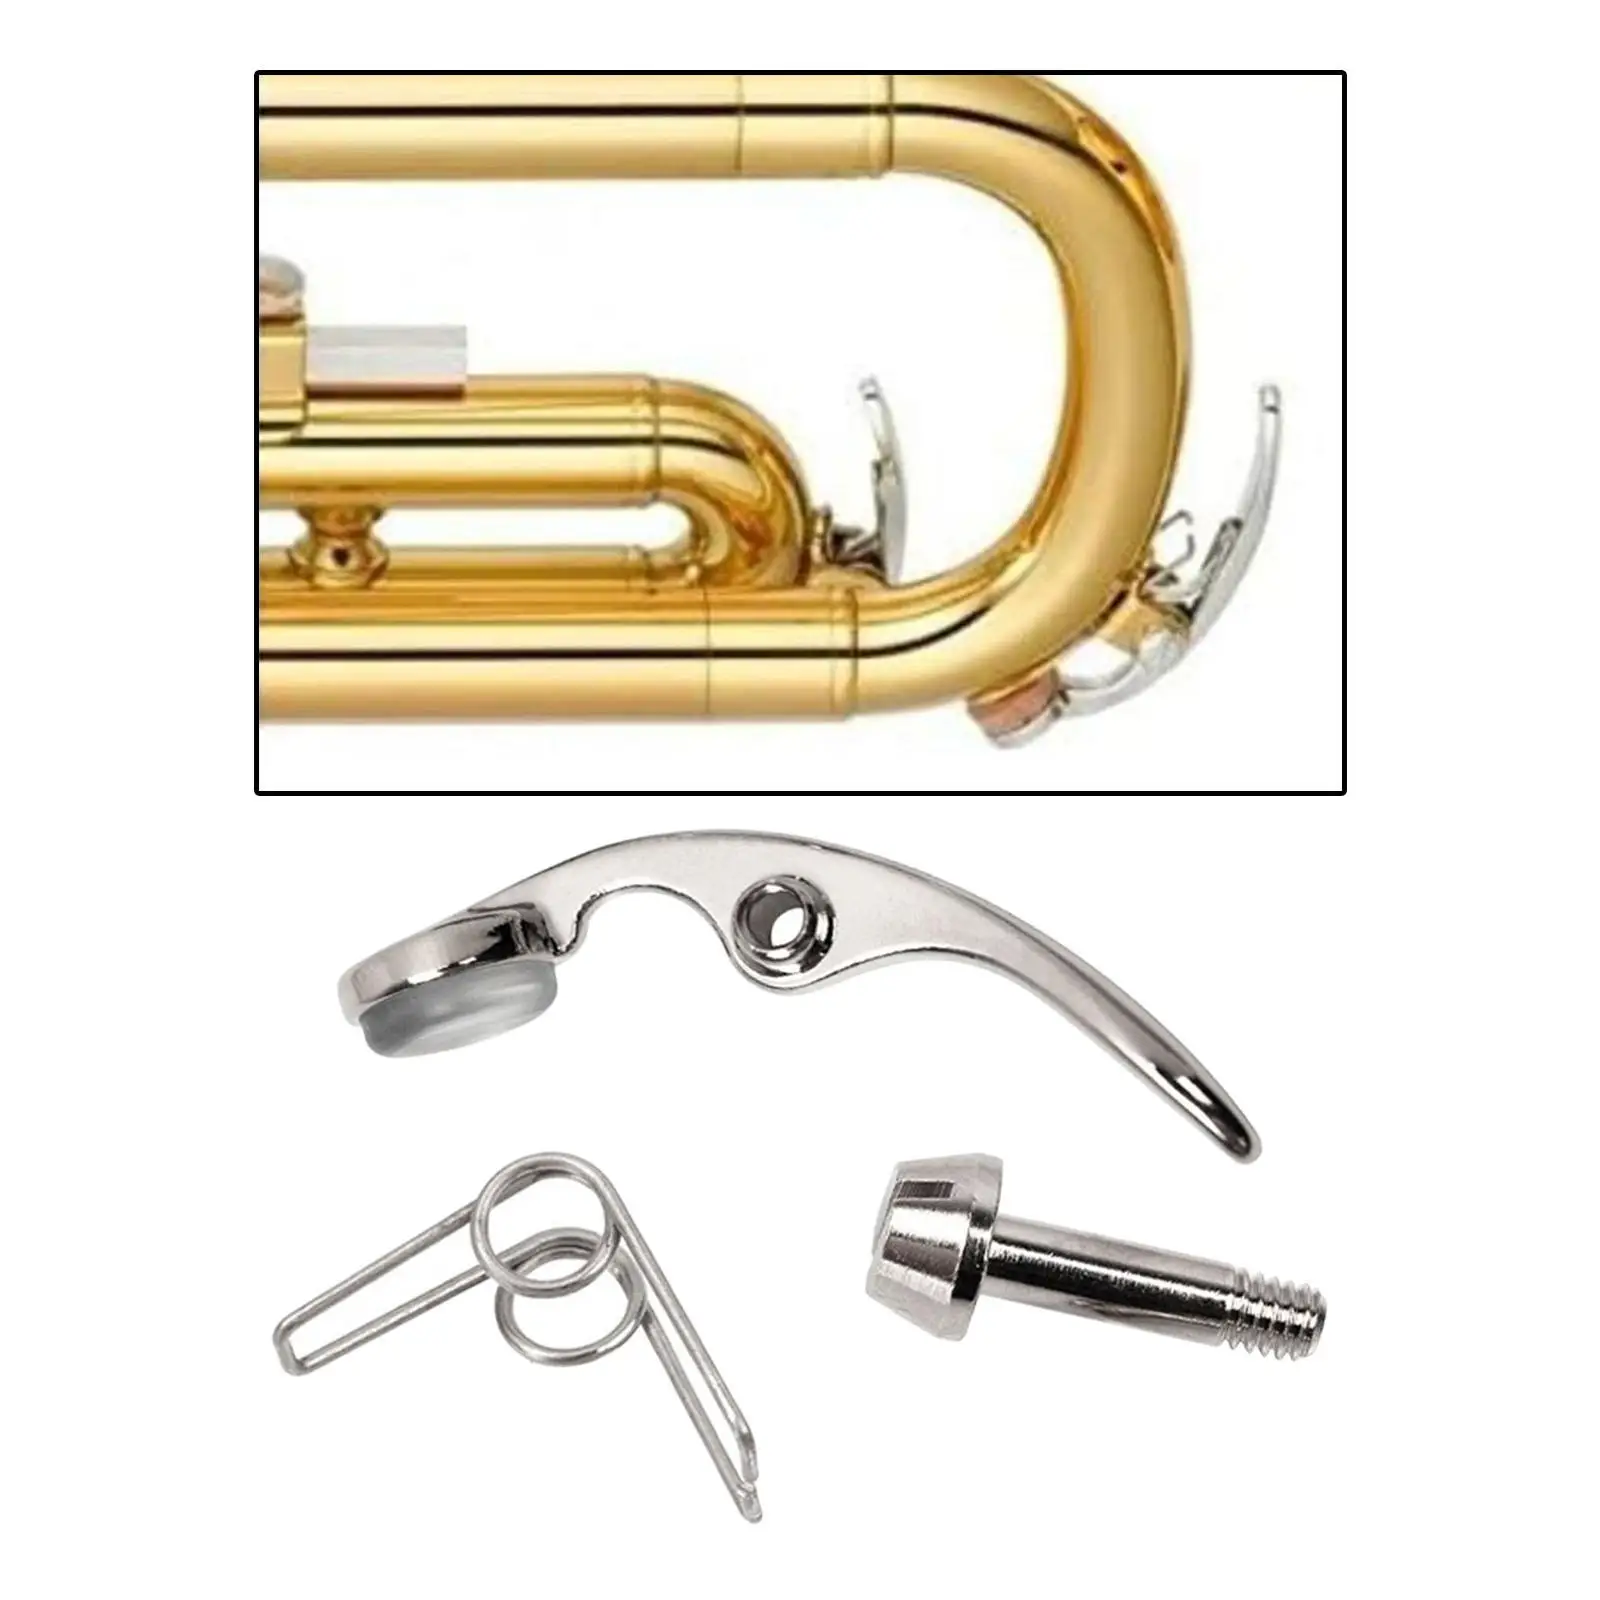 Trumpet Water Value Repair Kits, Water Value Holders Portable Accessory, with Springs Screws Replacement Parts for Repairing